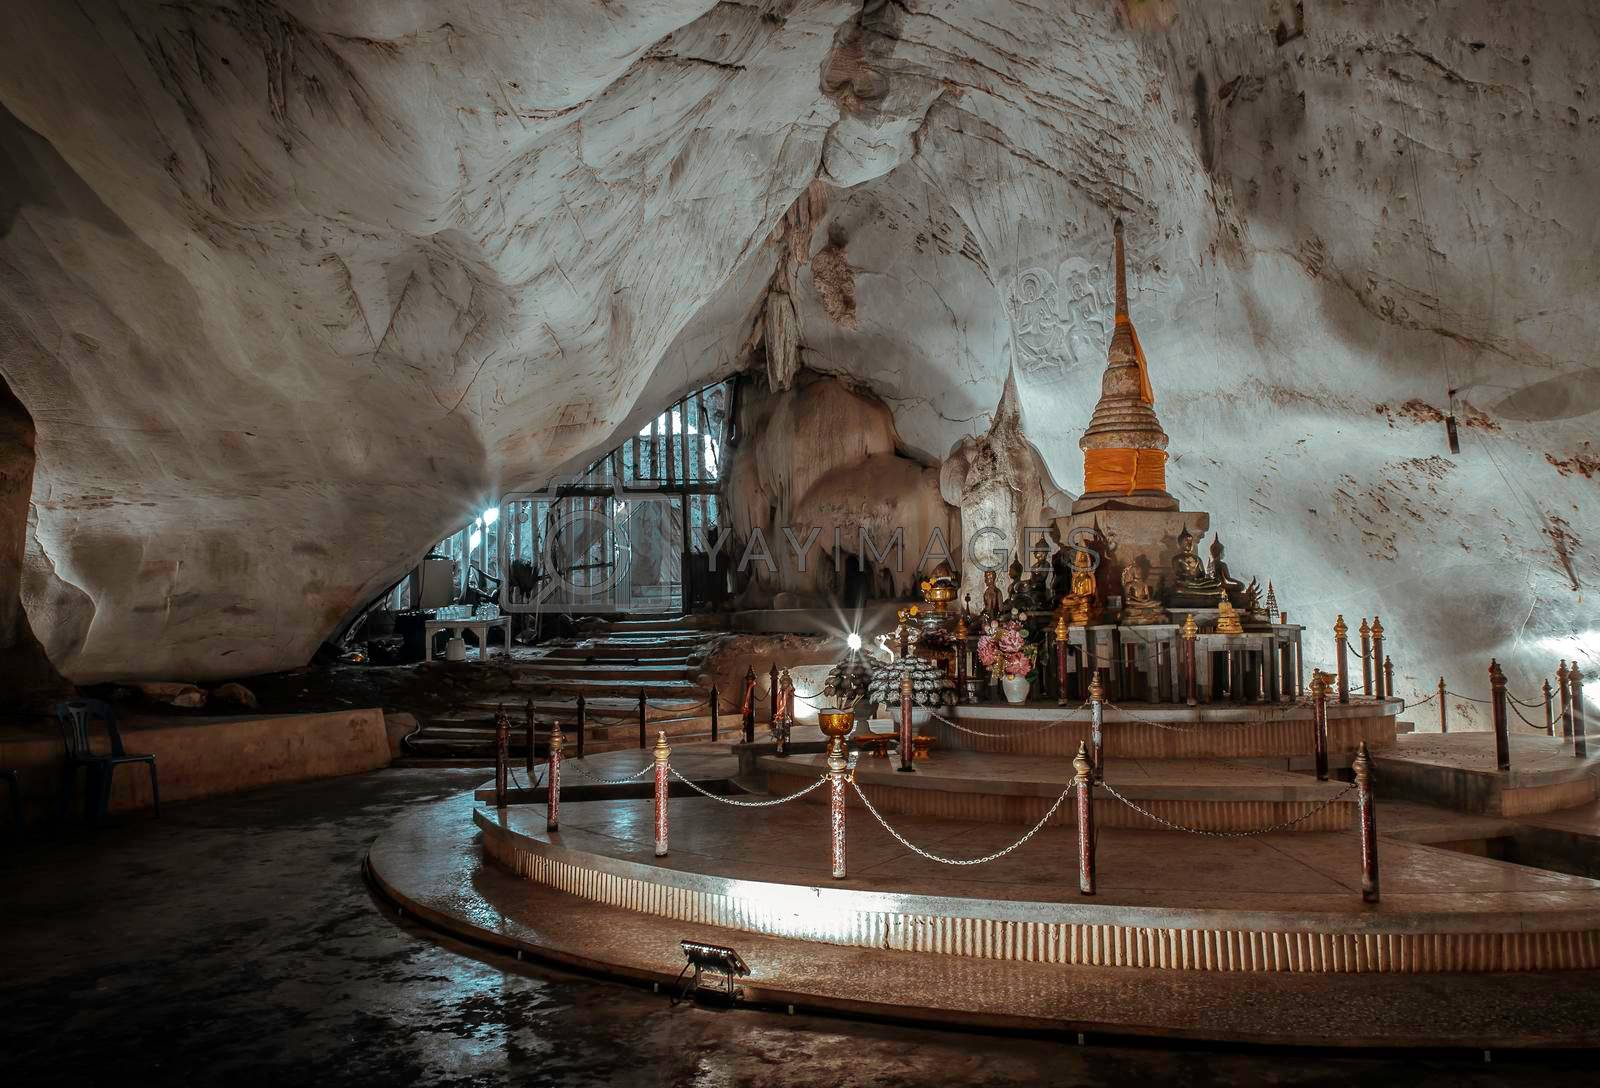 The buddha statues or The buddha image inside Wat Tham Phra Phothisat or Bodhisattva Cave Temple and it is the old and limestone cave temples at Kaeng Khoi District, Saraburi Province, Thailand, Selective focus.